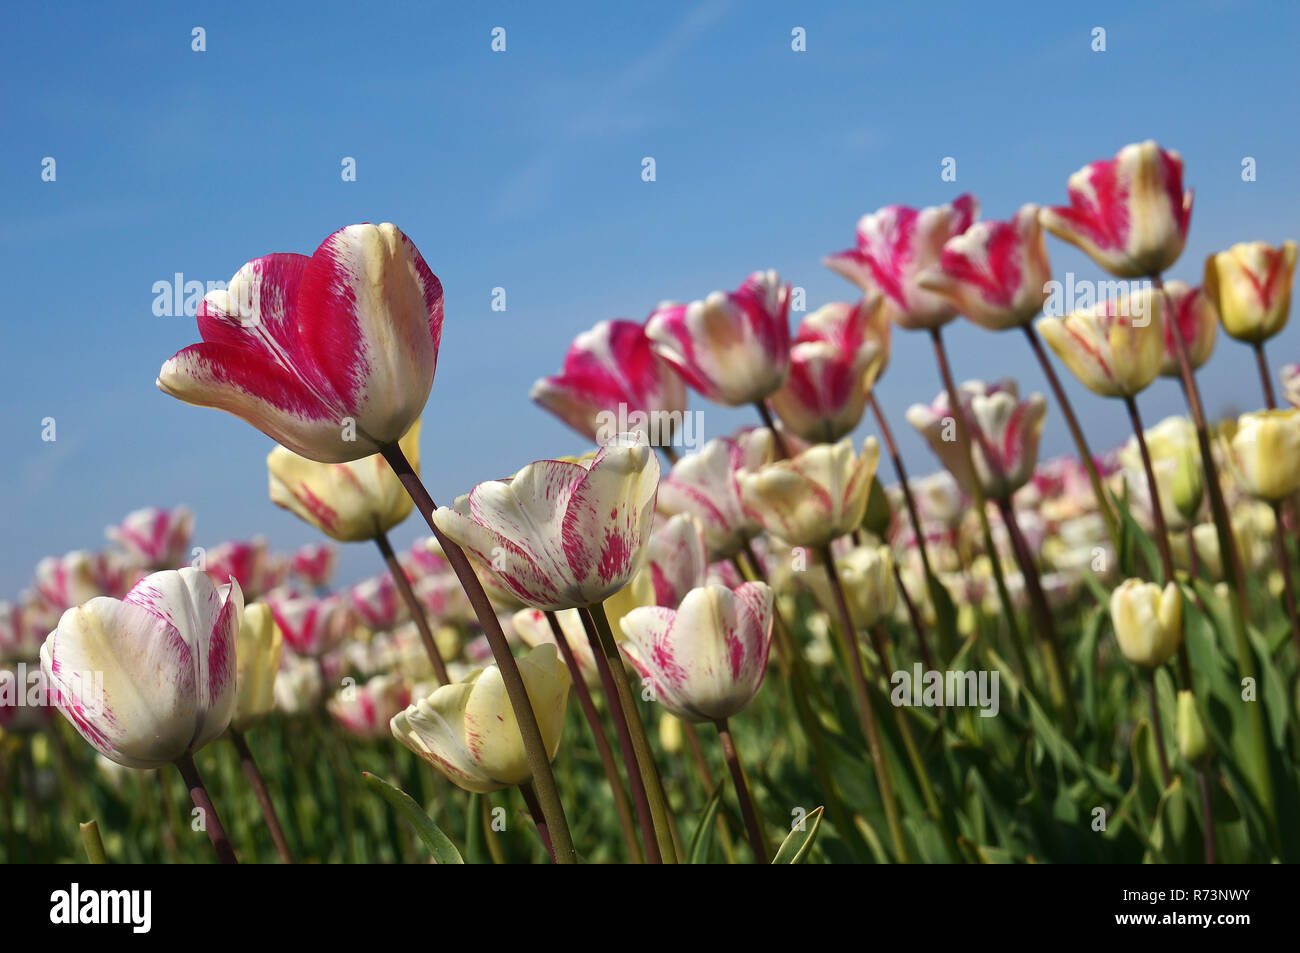 Detail of a tulip field with pink/white coloured tulips, Bollenstreek, Holland, Netherlands. Stock Photo